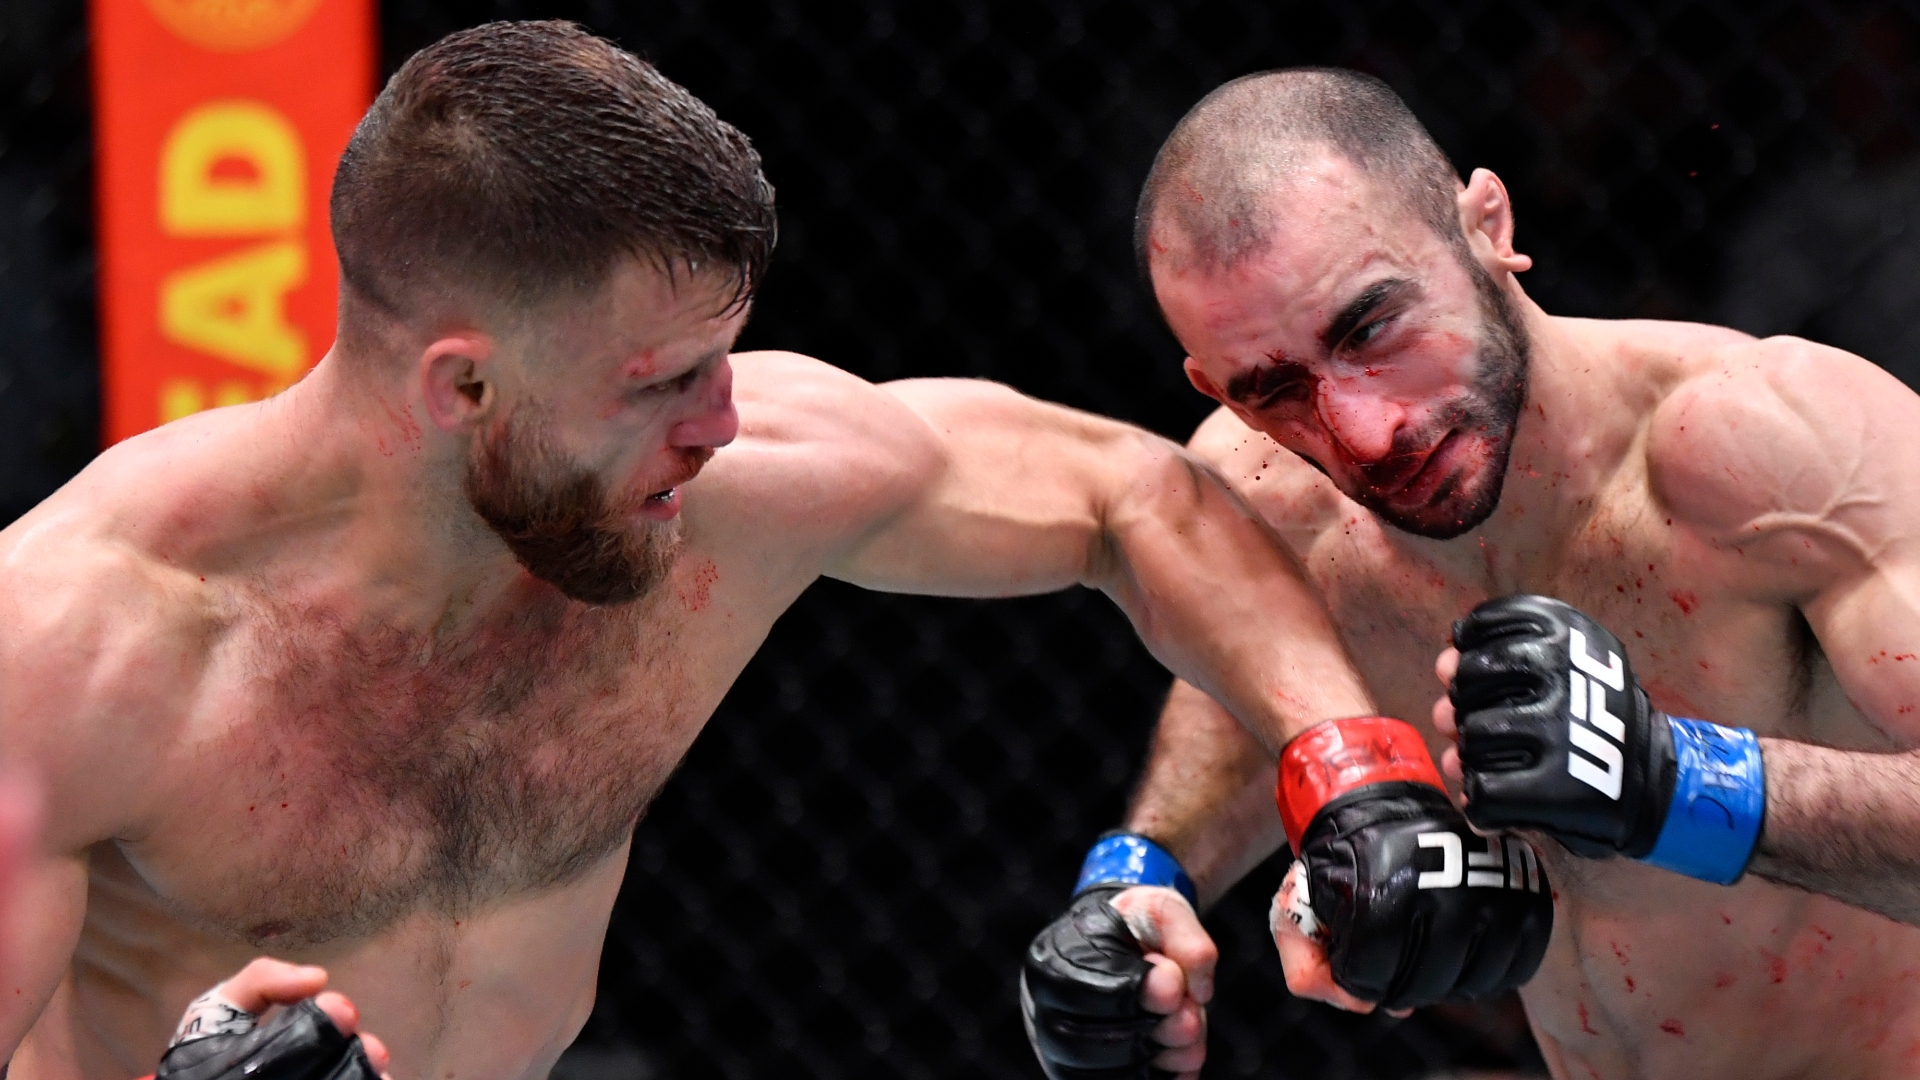 Calvin Kattar impresses with victory in his return to the Octagon - Stream the Video